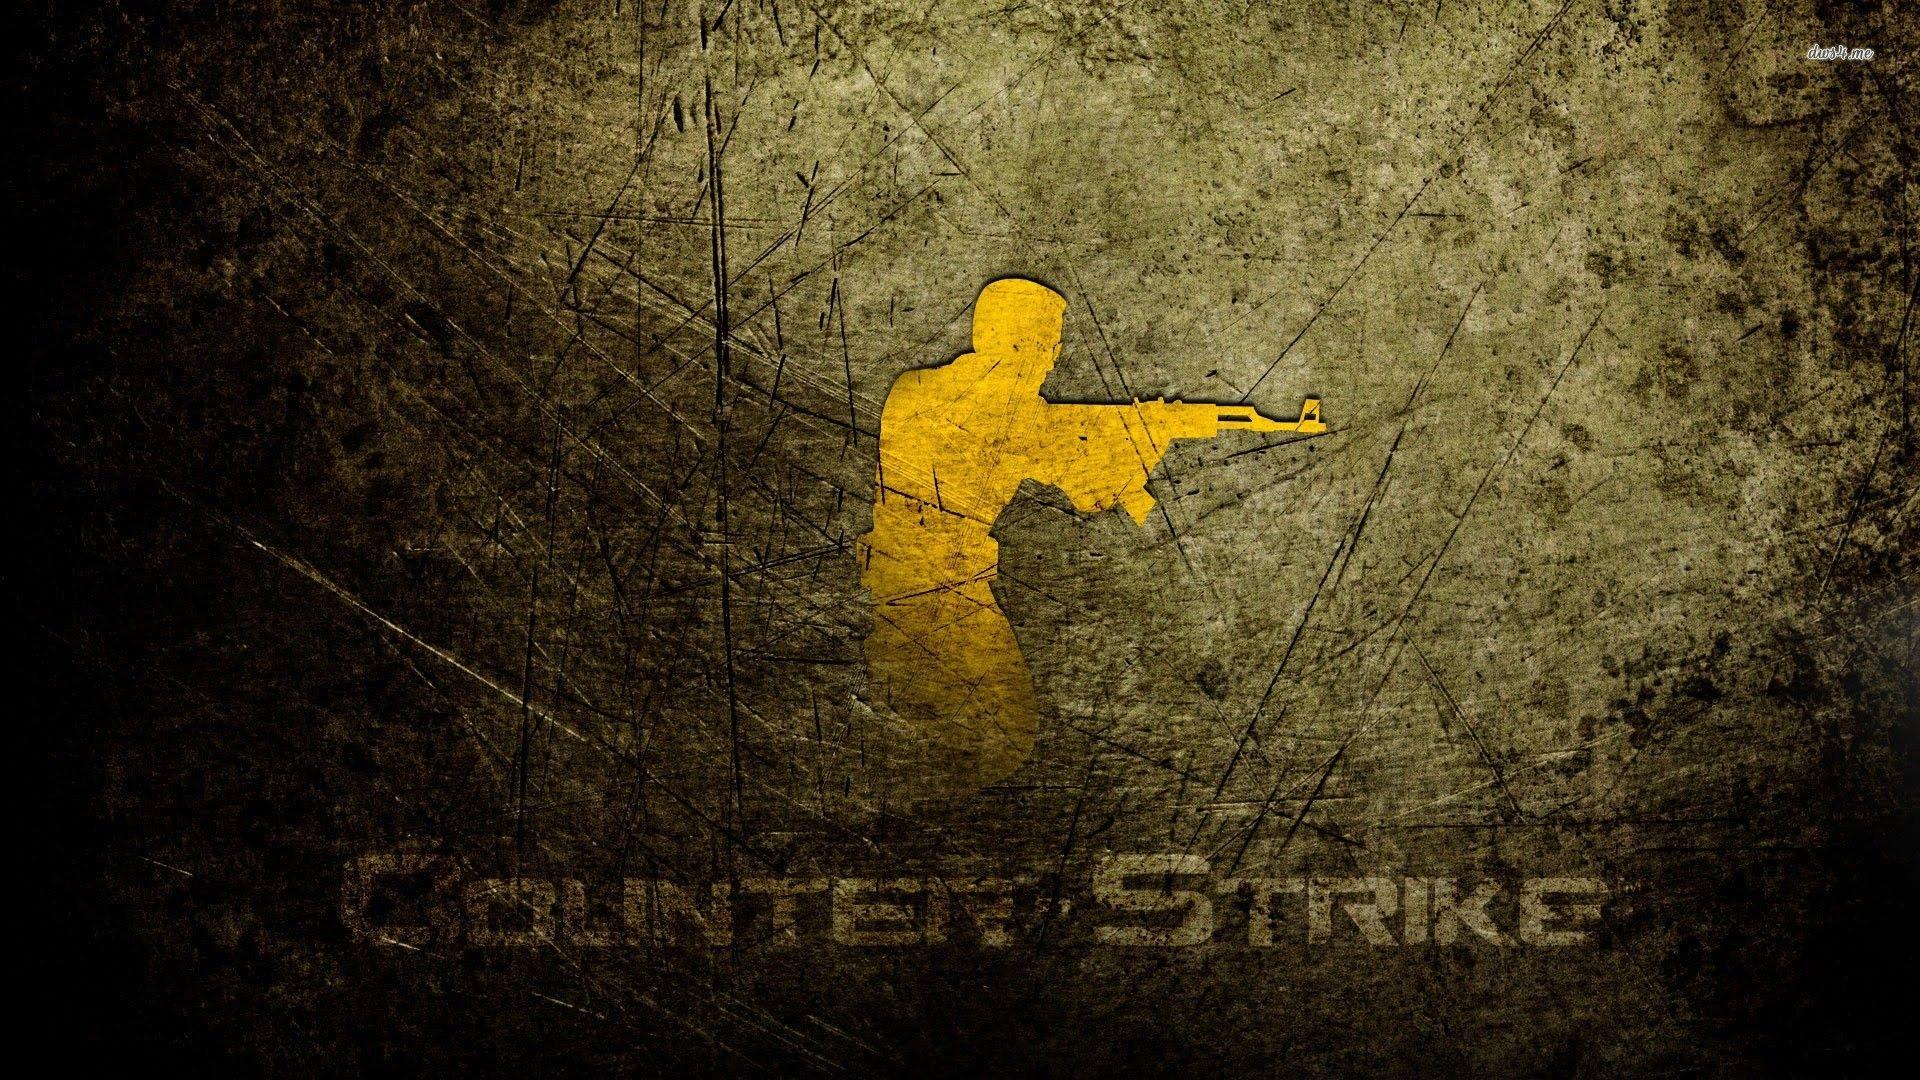 Counter Strike Source Wallpaper Pag On Counter Strike Source Game